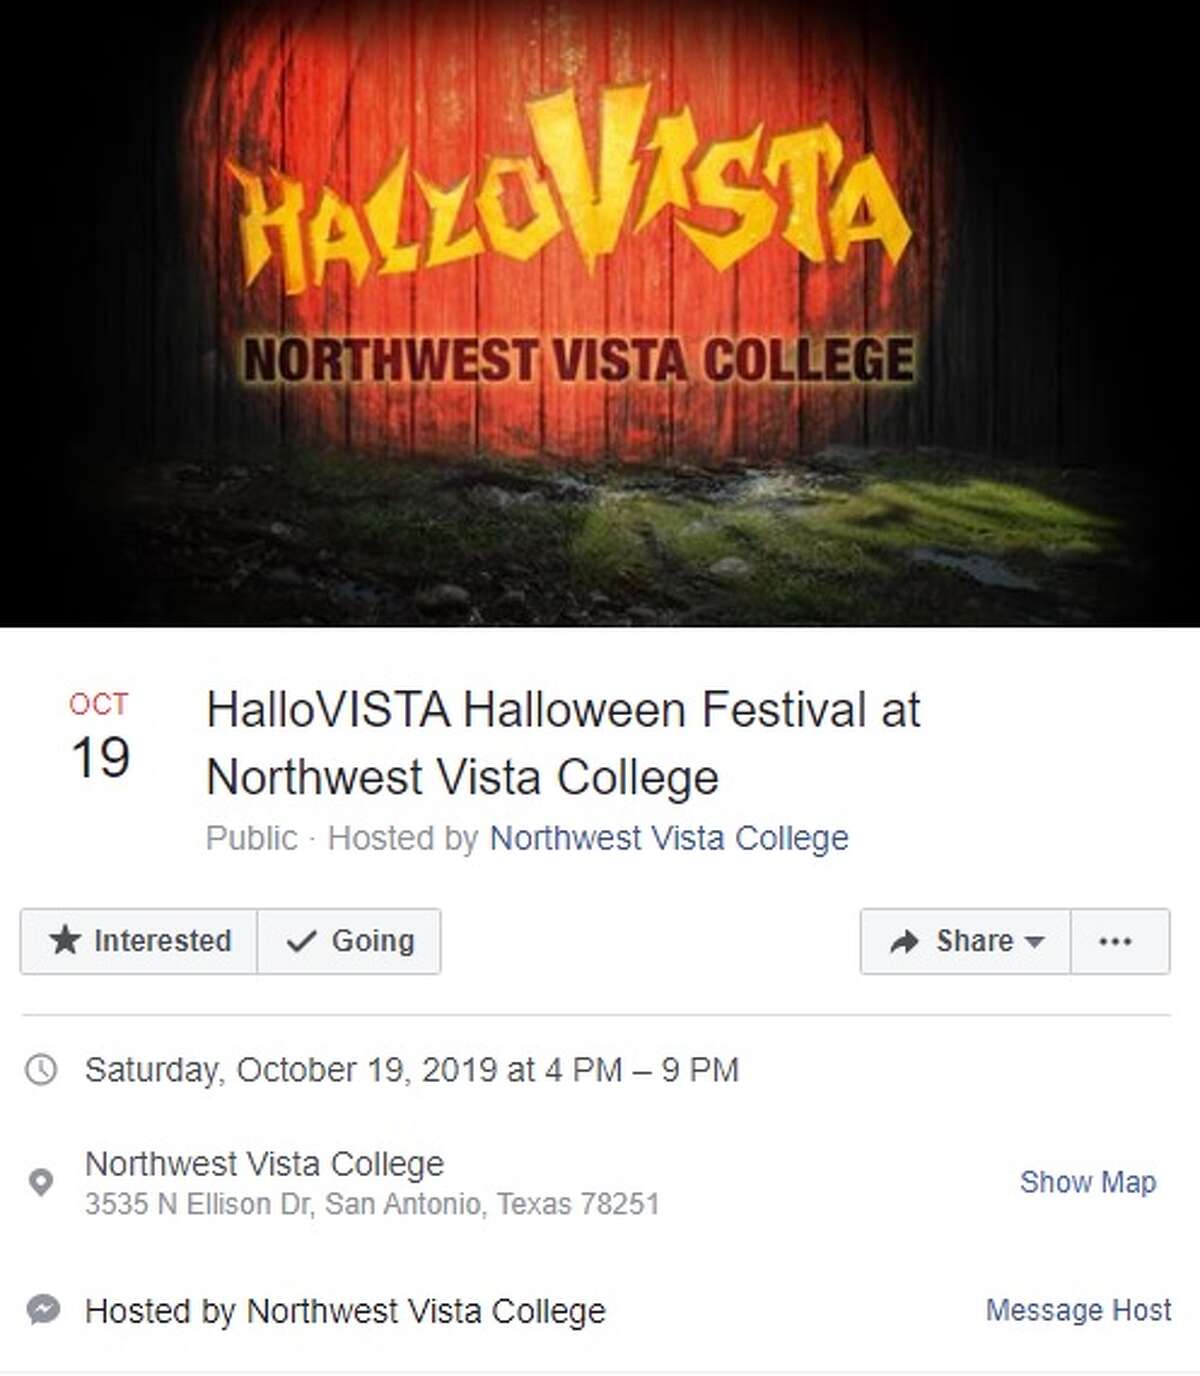 HalloVISTA Halloween Festival will be from 4 to 9 p.m. on Saturday, Oct. 19 at Northwest Vista College, 3535 North Ellison Drive. For more information, click here.